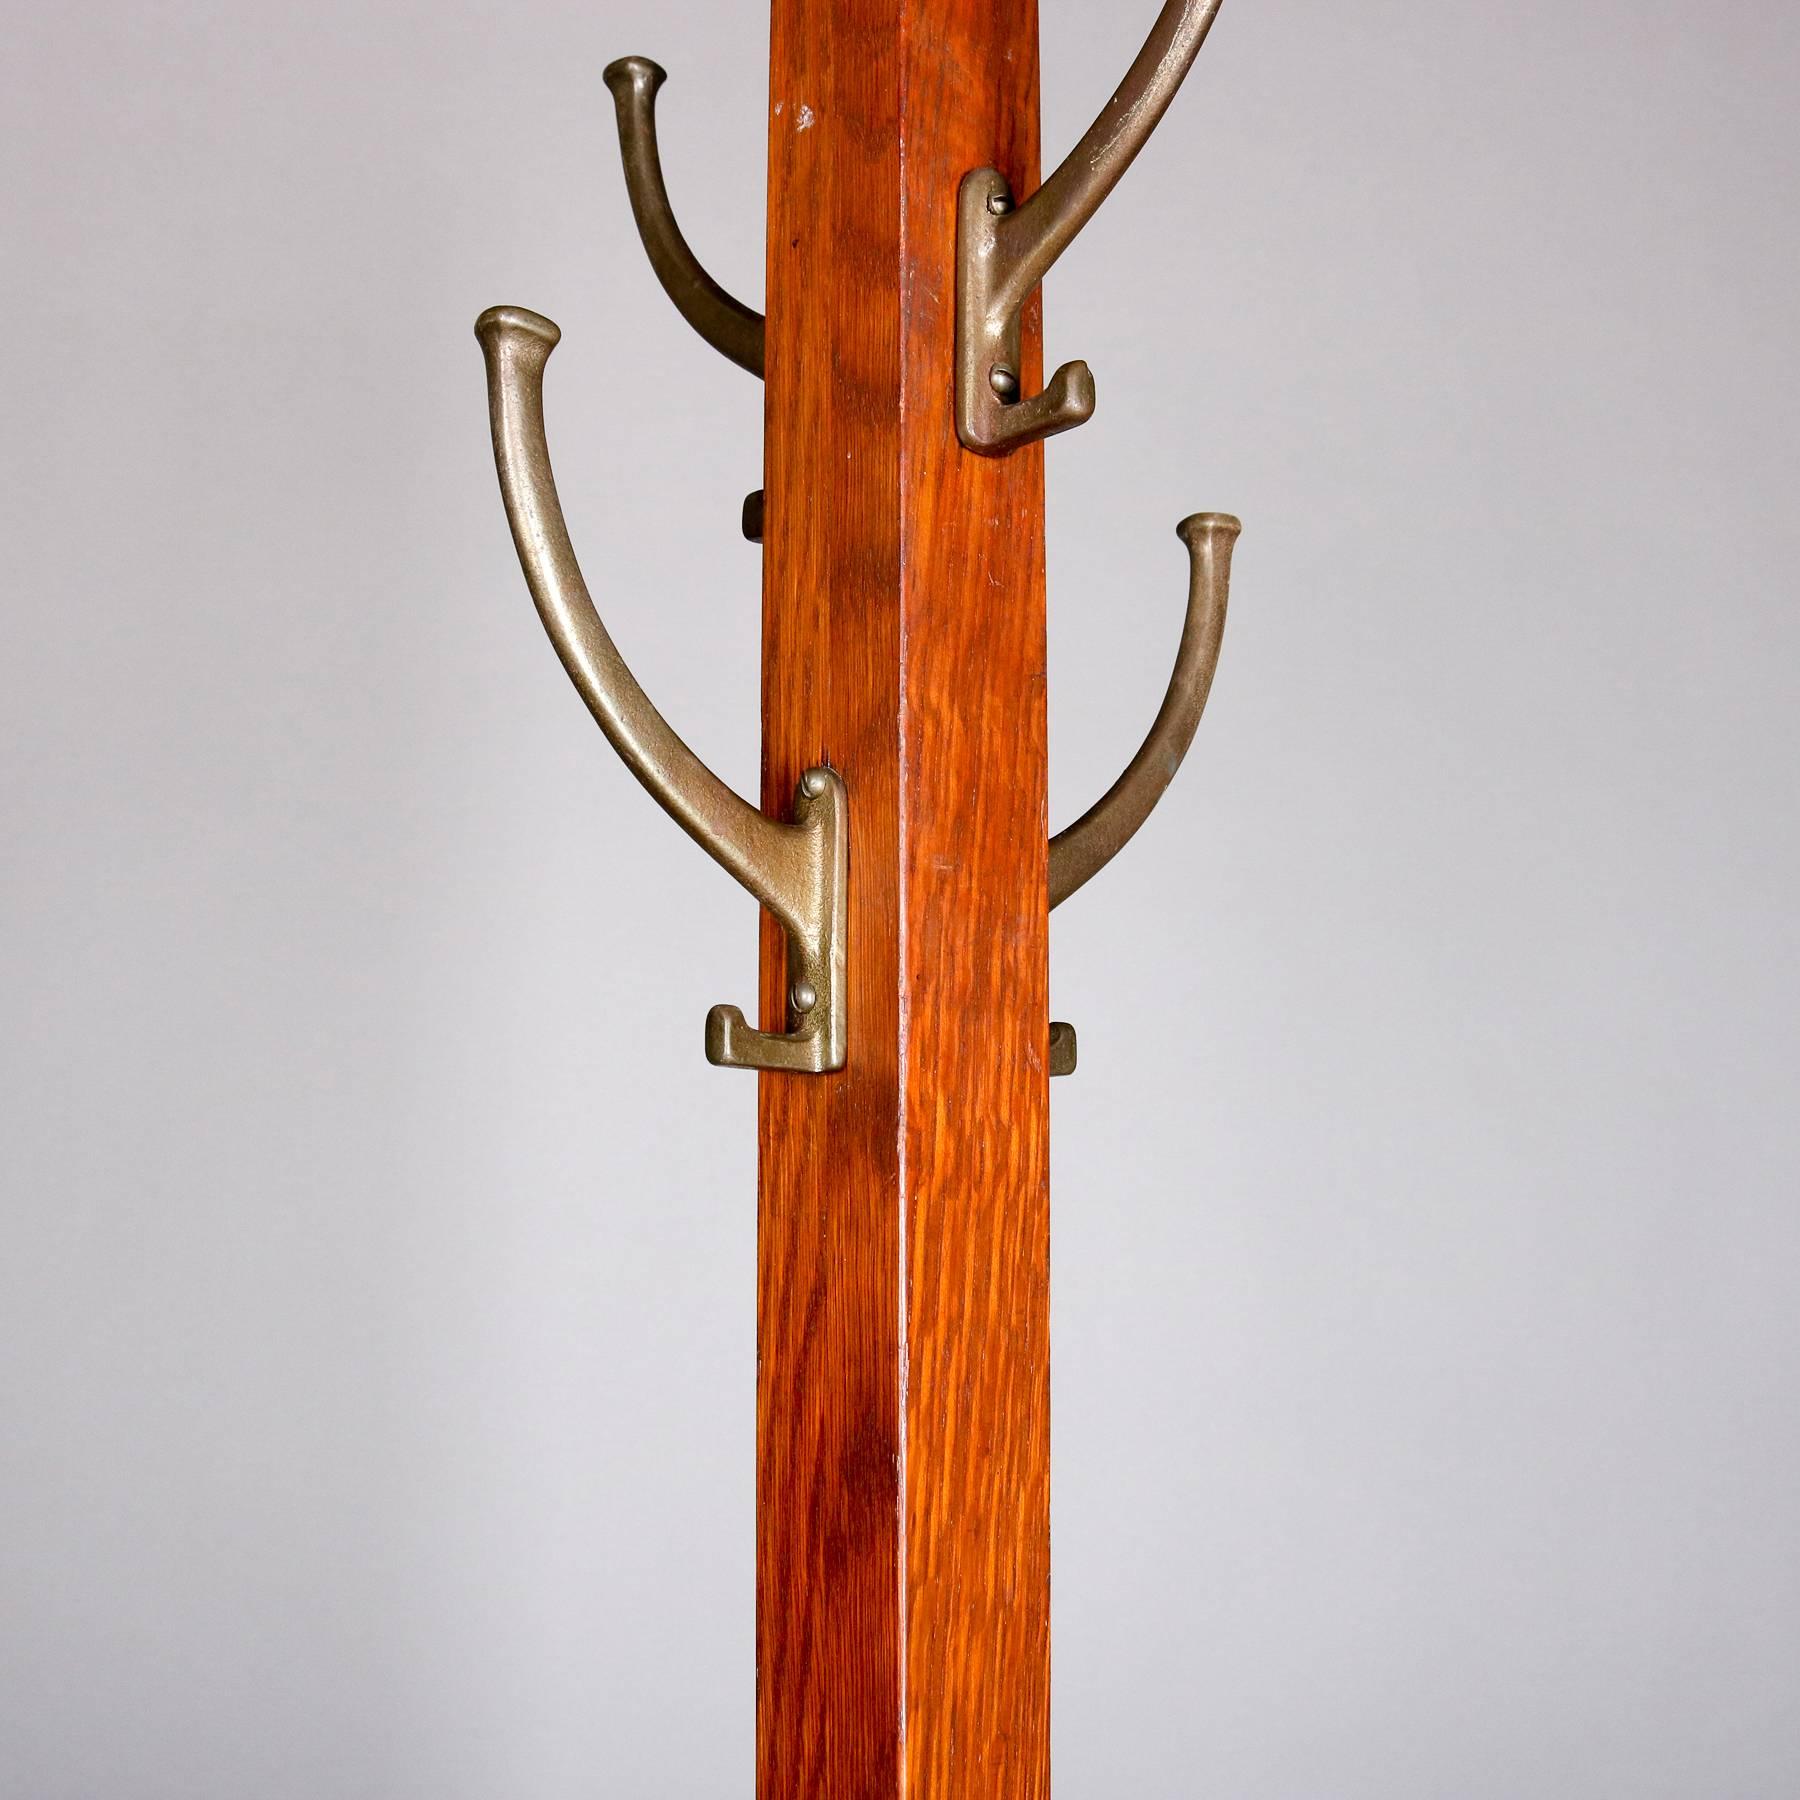 American Antique Arts & Crafts Mission Oak Hall Tree Coat Rack, Early 20th Century